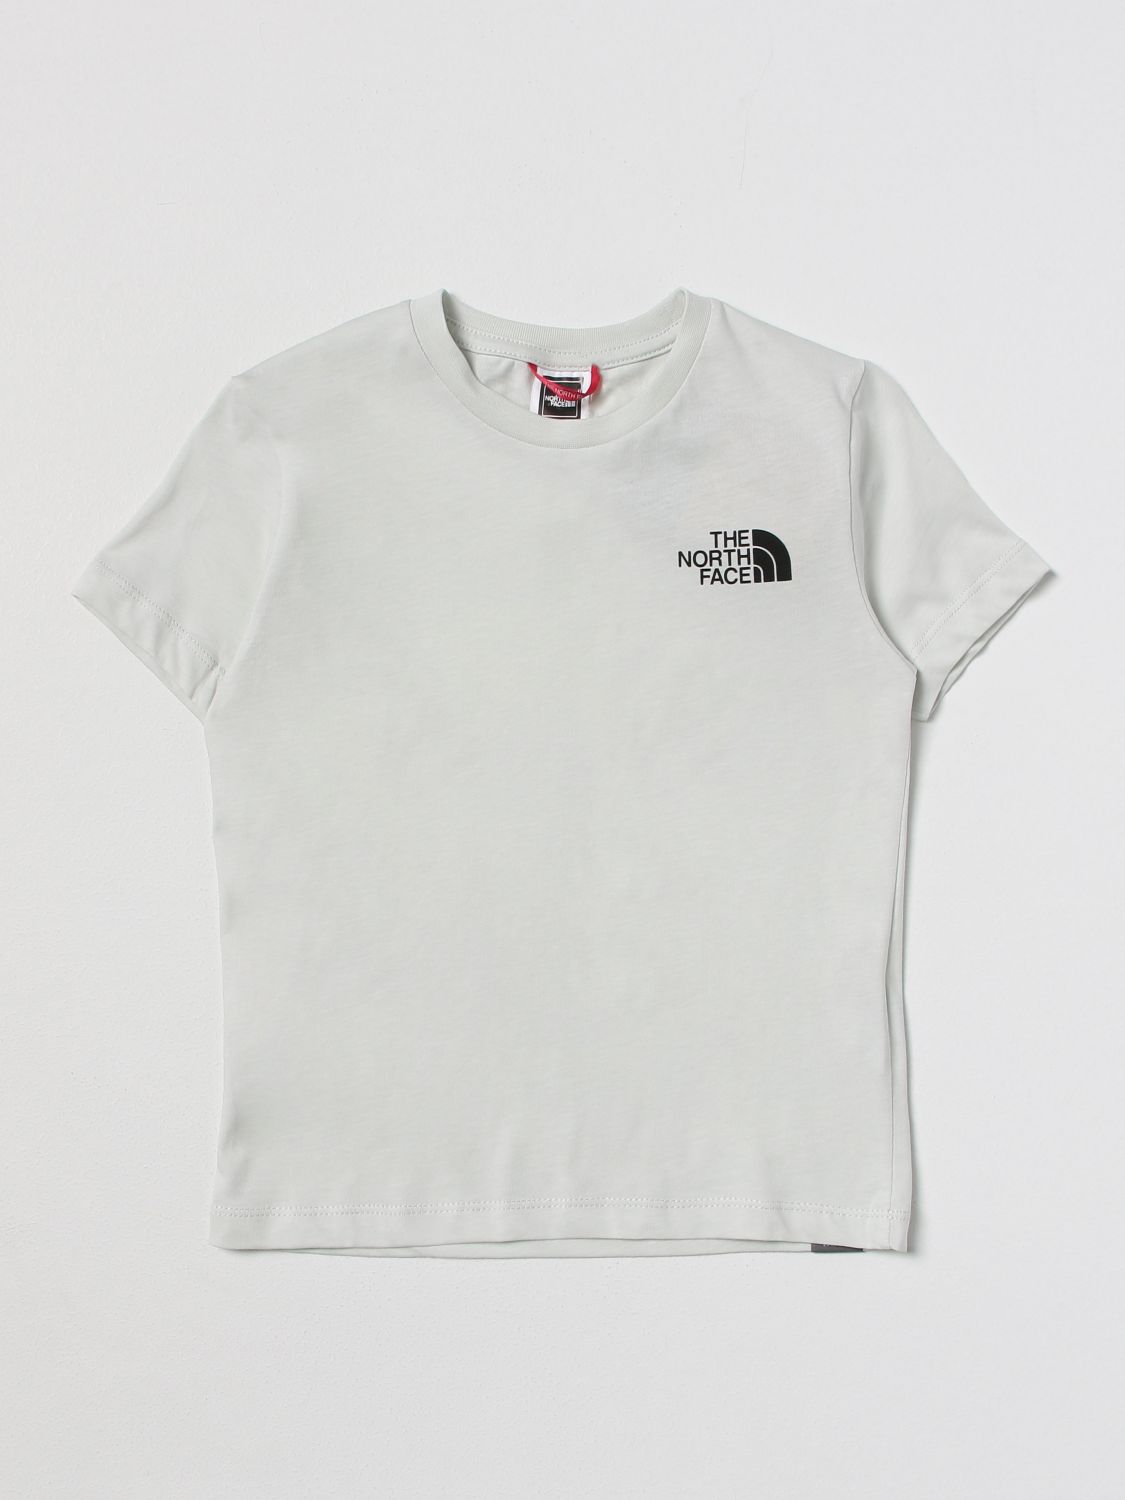 nogmaals Verslaving eigendom The North Face T-shirt Kinder Farbe Weiss 1 In White 1 | ModeSens